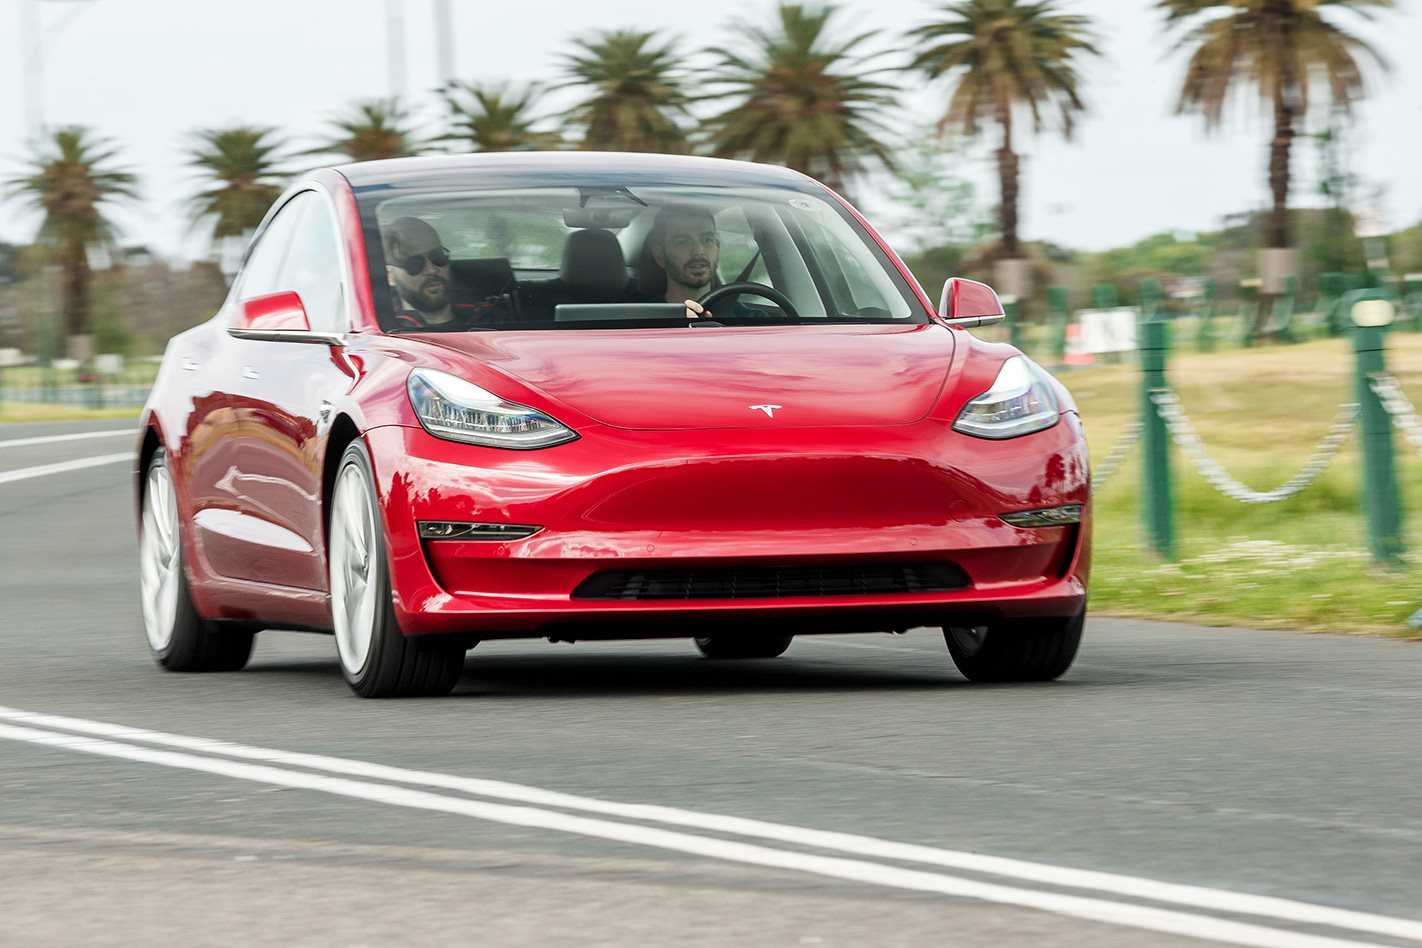 Tesla Model 3 SR+ Now Even More Compelling in Australia with New Prices & No Luxury Tax